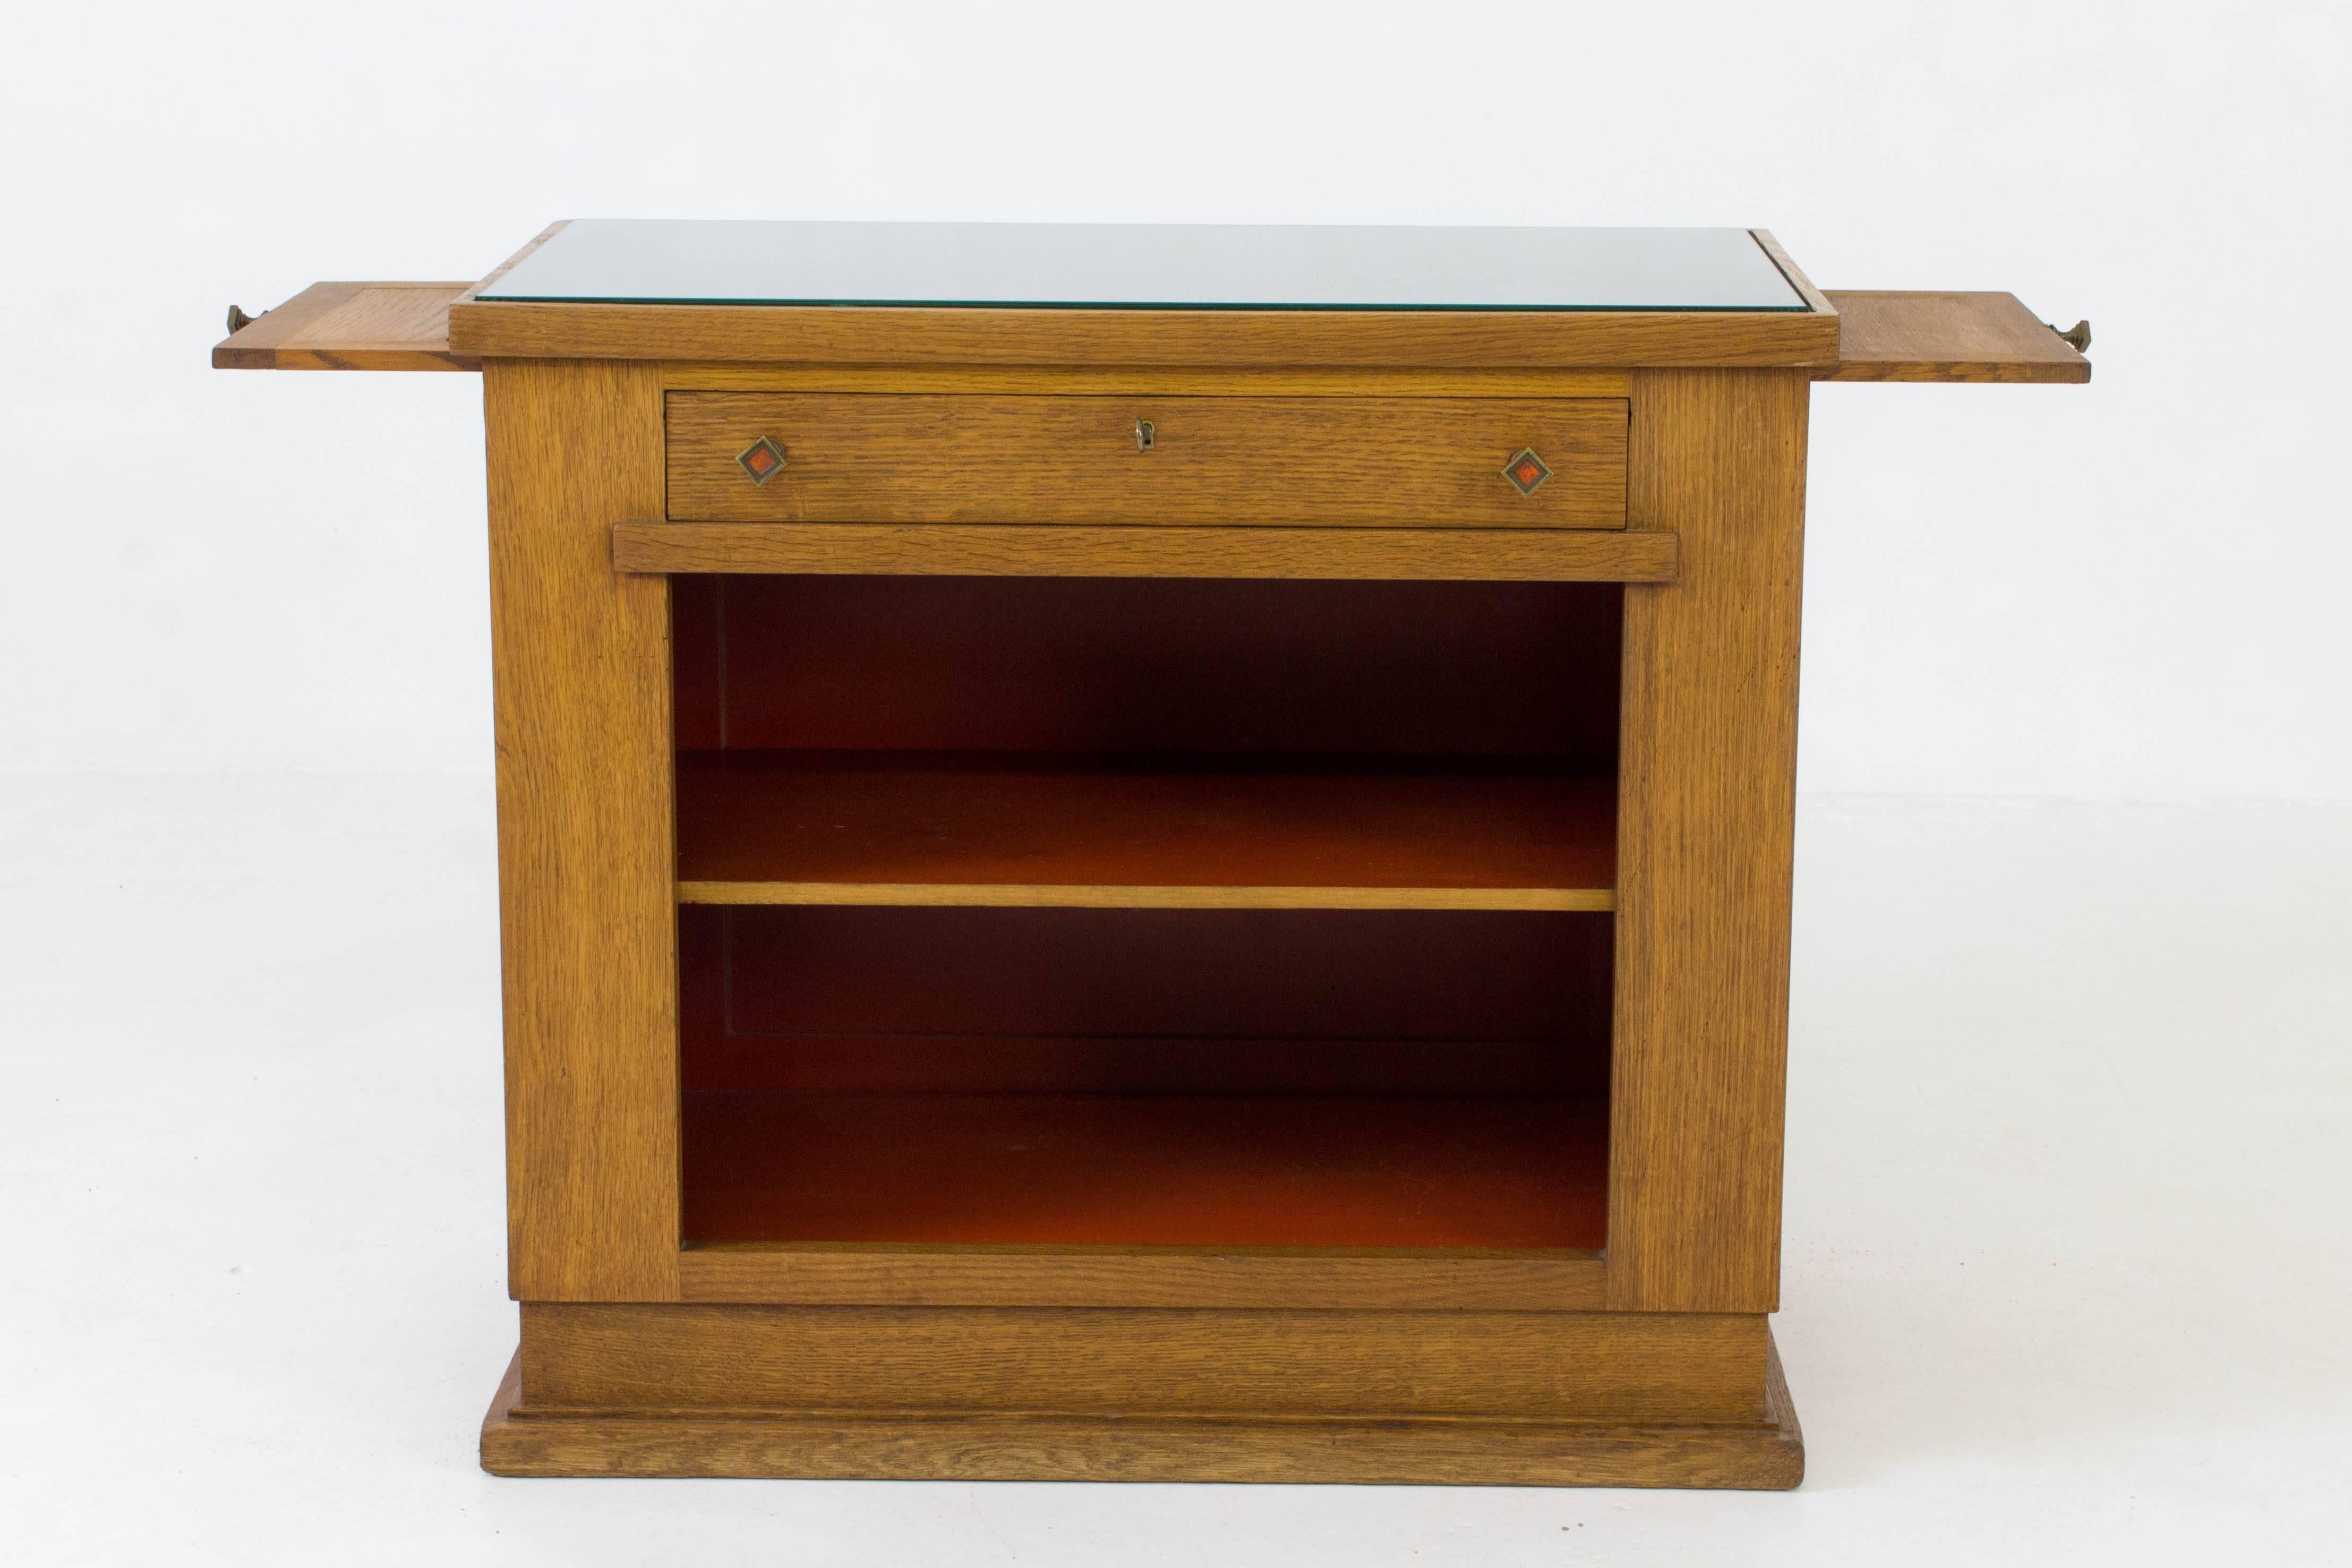 Dutch Rare Art Deco Haagse School Tea Cabinet by H.Wouda for Pander, 1924